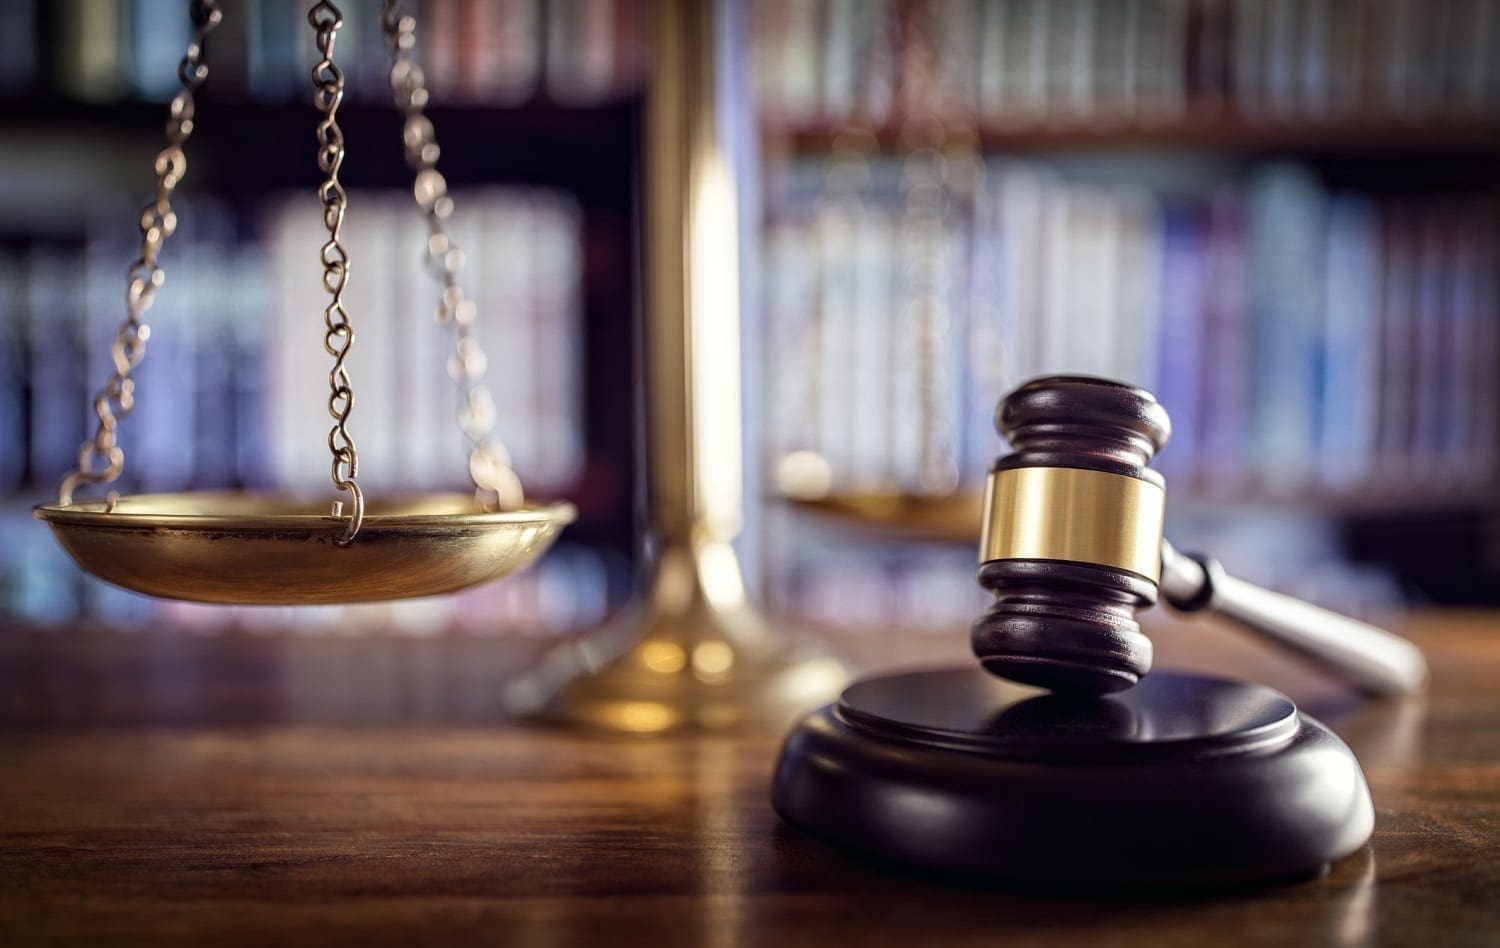 Judge's gavel and scales of justice: ID 66558437 © Flynt | Dreamstime.com